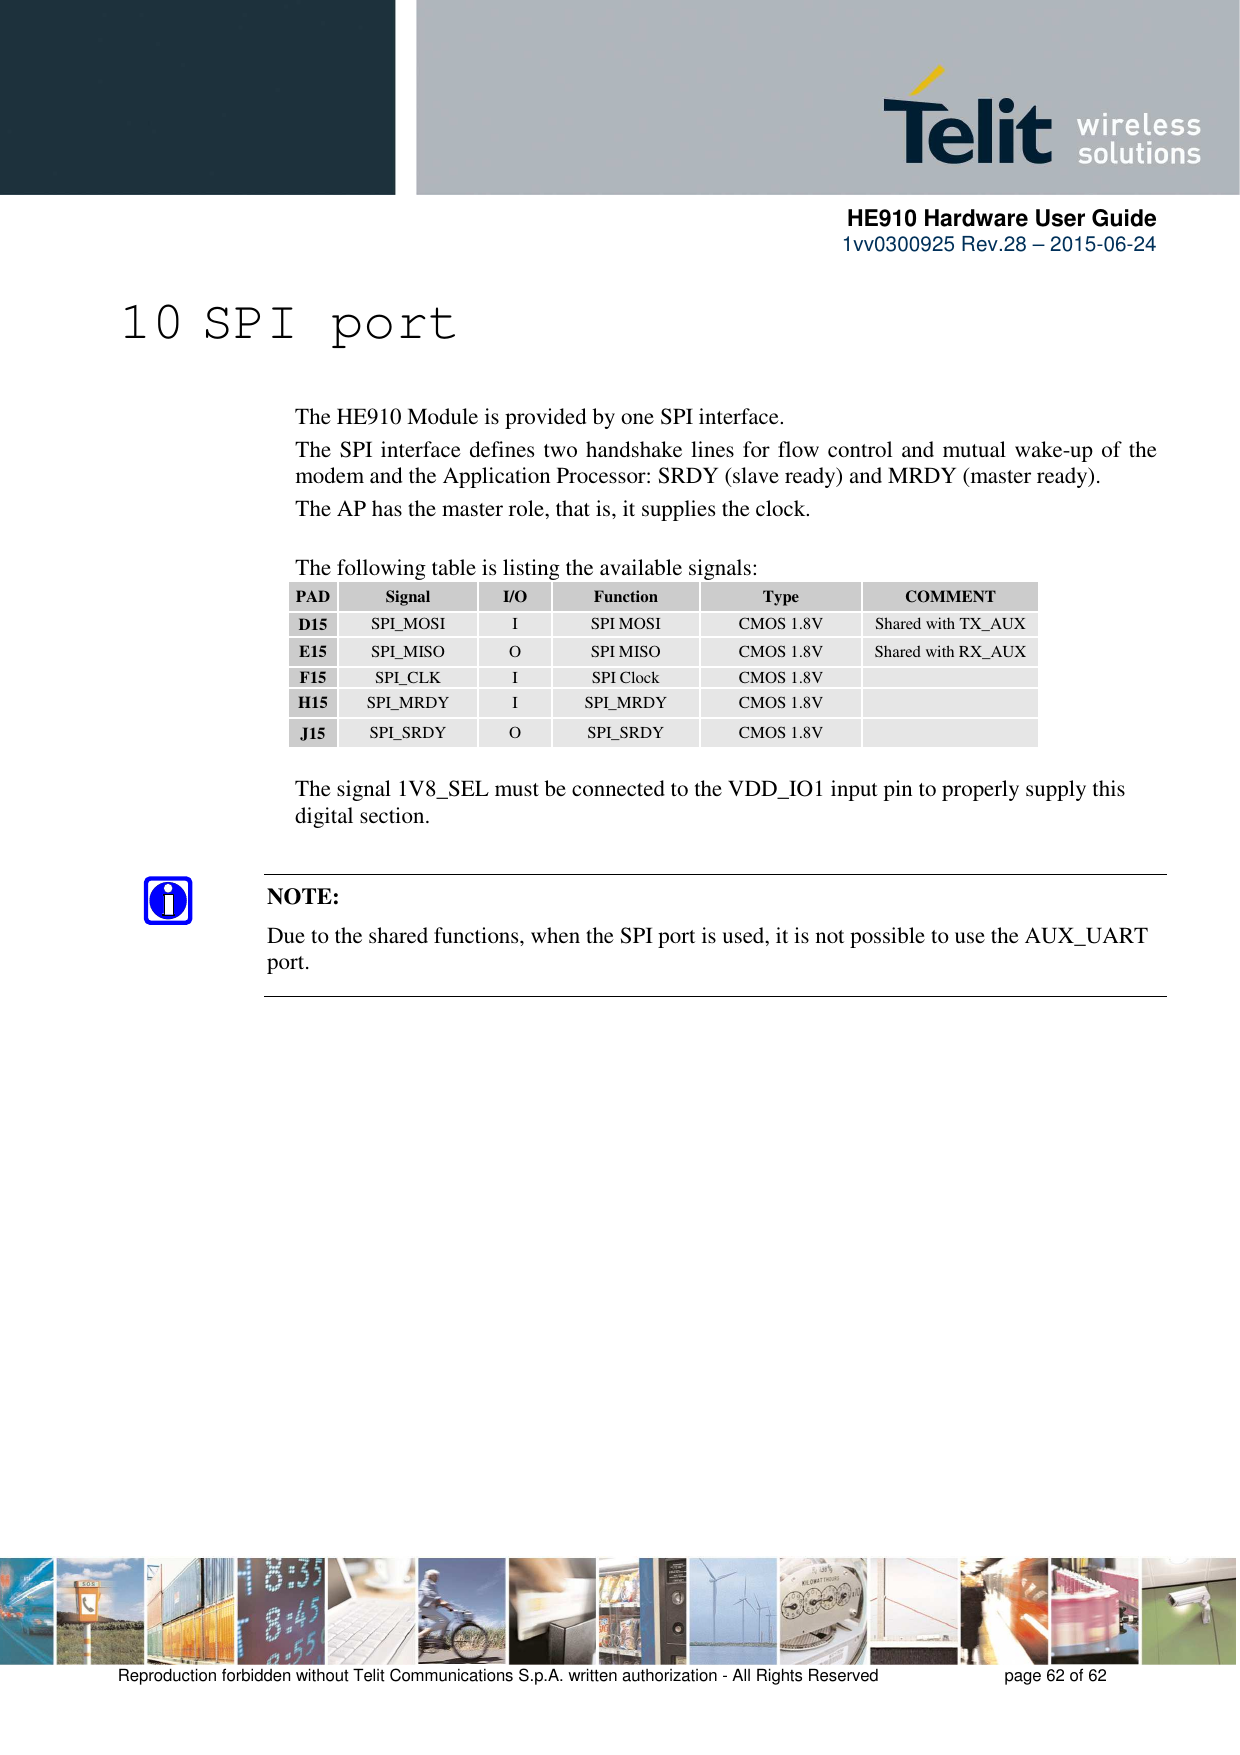      HE910 Hardware User Guide 1vv0300925 Rev.28 – 2015-06-24    Reproduction forbidden without Telit Communications S.p.A. written authorization - All Rights Reserved    page 62 of 62  10 SPI port     The HE910 Module is provided by one SPI interface.       The SPI interface defines two handshake lines for flow control and mutual wake-up of the     modem and the Application Processor: SRDY (slave ready) and MRDY (master ready).     The AP has the master role, that is, it supplies the clock.      The following table is listing the available signals: PAD Signal  I/O  Function  Type  COMMENT D15  SPI_MOSI  I  SPI MOSI  CMOS 1.8V  Shared with TX_AUX E15  SPI_MISO  O  SPI MISO  CMOS 1.8V  Shared with RX_AUX F15  SPI_CLK  I  SPI Clock  CMOS 1.8V   H15  SPI_MRDY  I  SPI_MRDY  CMOS 1.8V   J15  SPI_SRDY  O  SPI_SRDY  CMOS 1.8V      The signal 1V8_SEL must be connected to the VDD_IO1 input pin to properly supply this   digital section.   NOTE:  Due to the shared functions, when the SPI port is used, it is not possible to use the AUX_UART port. 